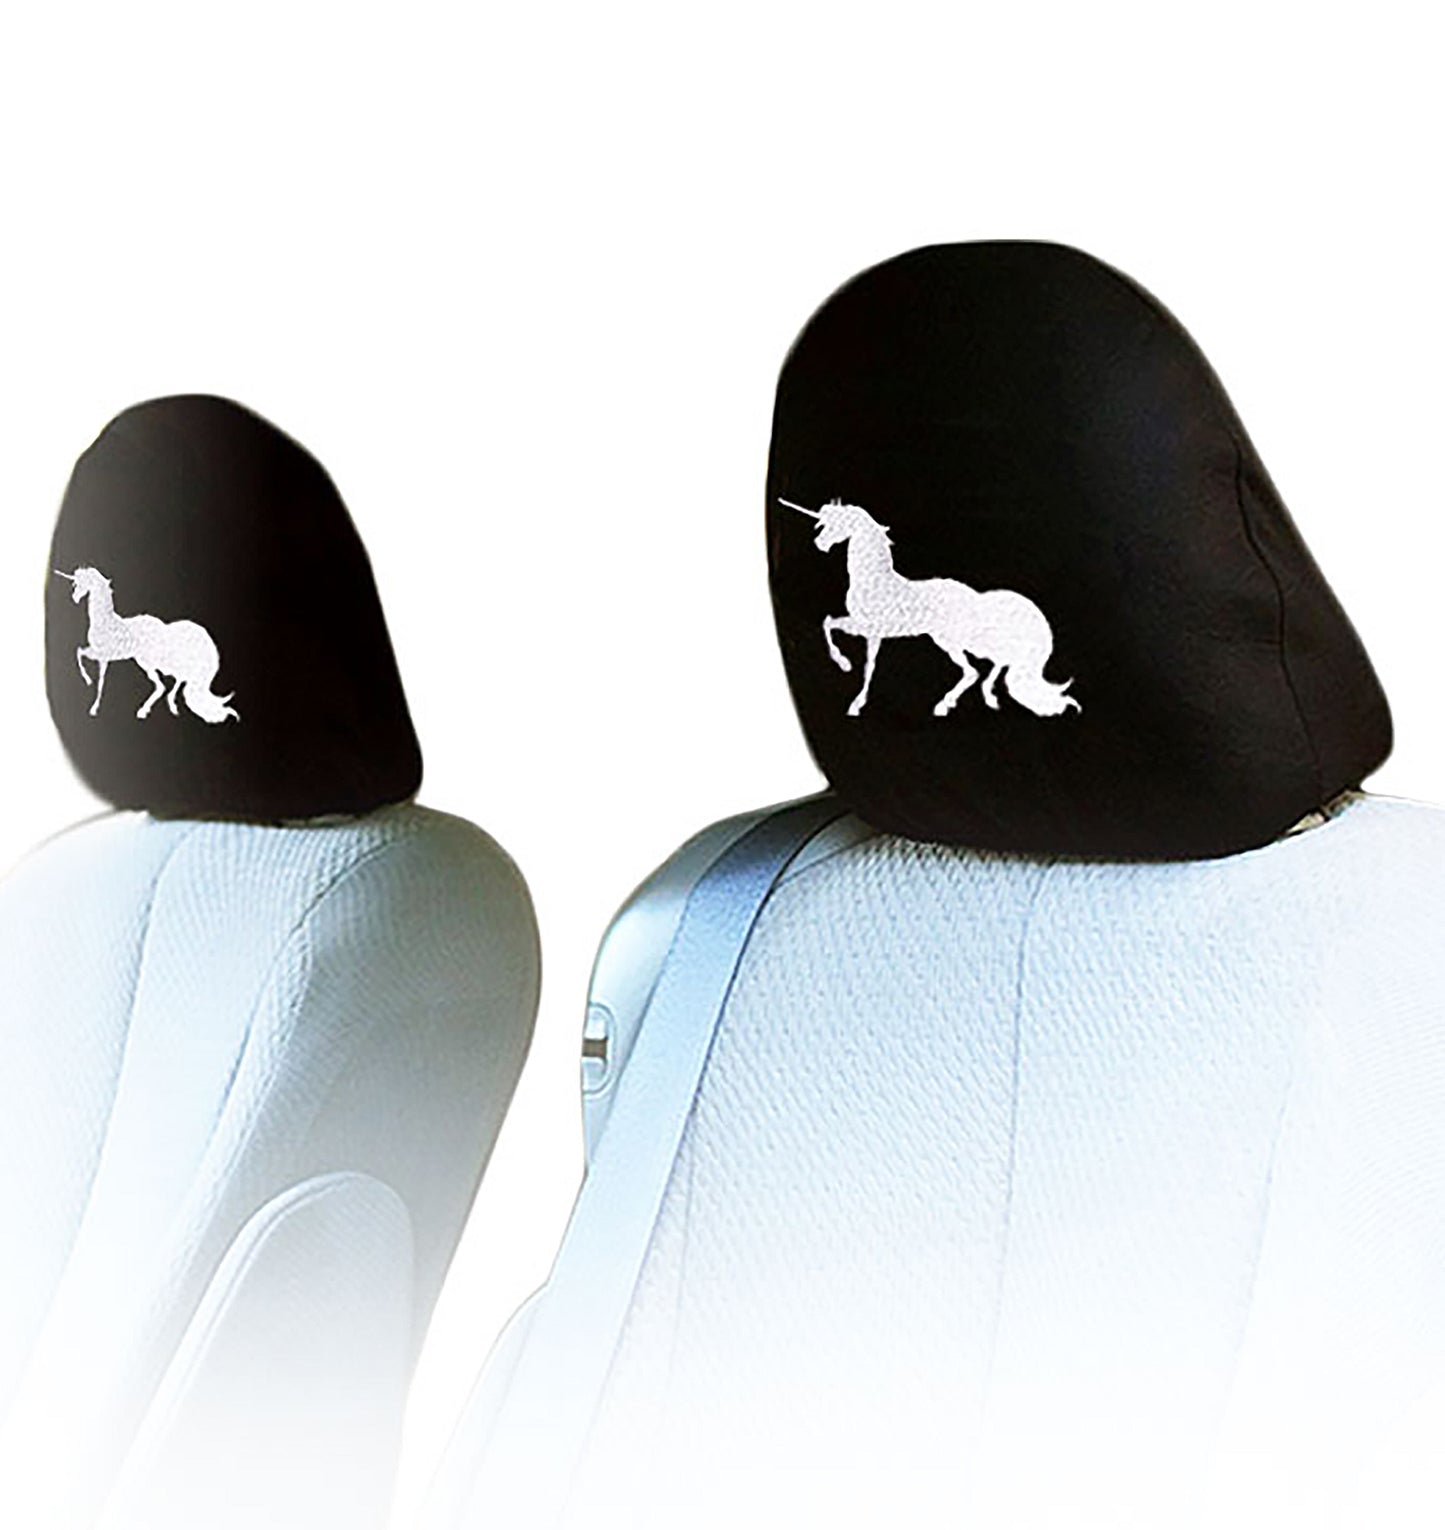 Car headrest cover with unicord design